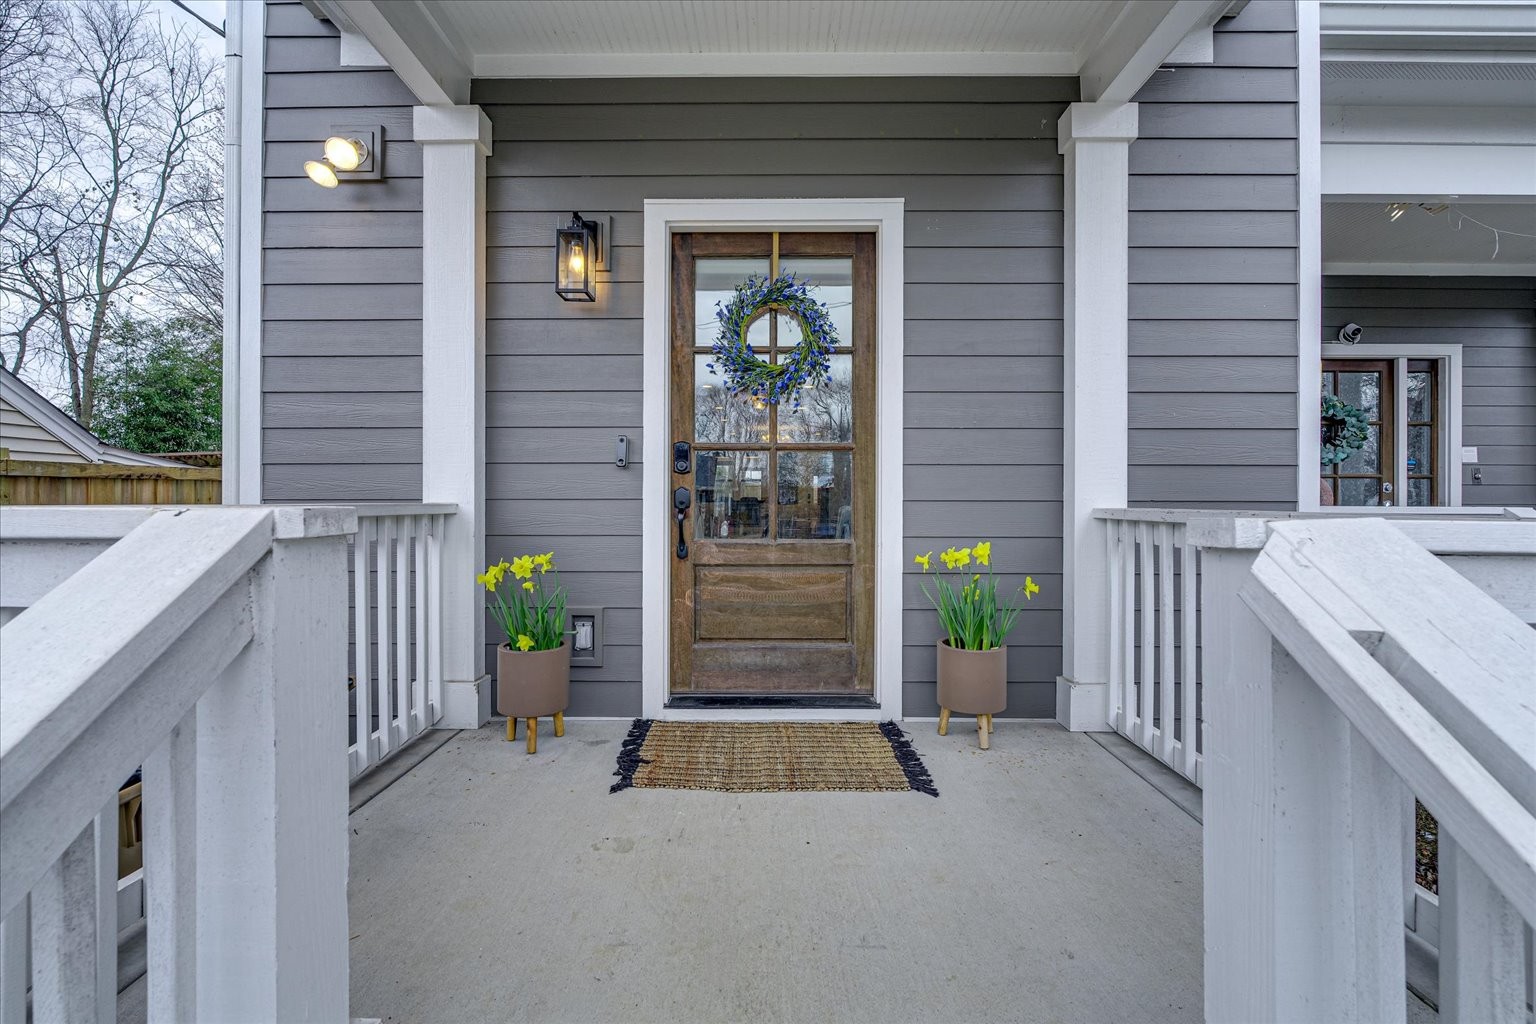 a view of entryway door of the house